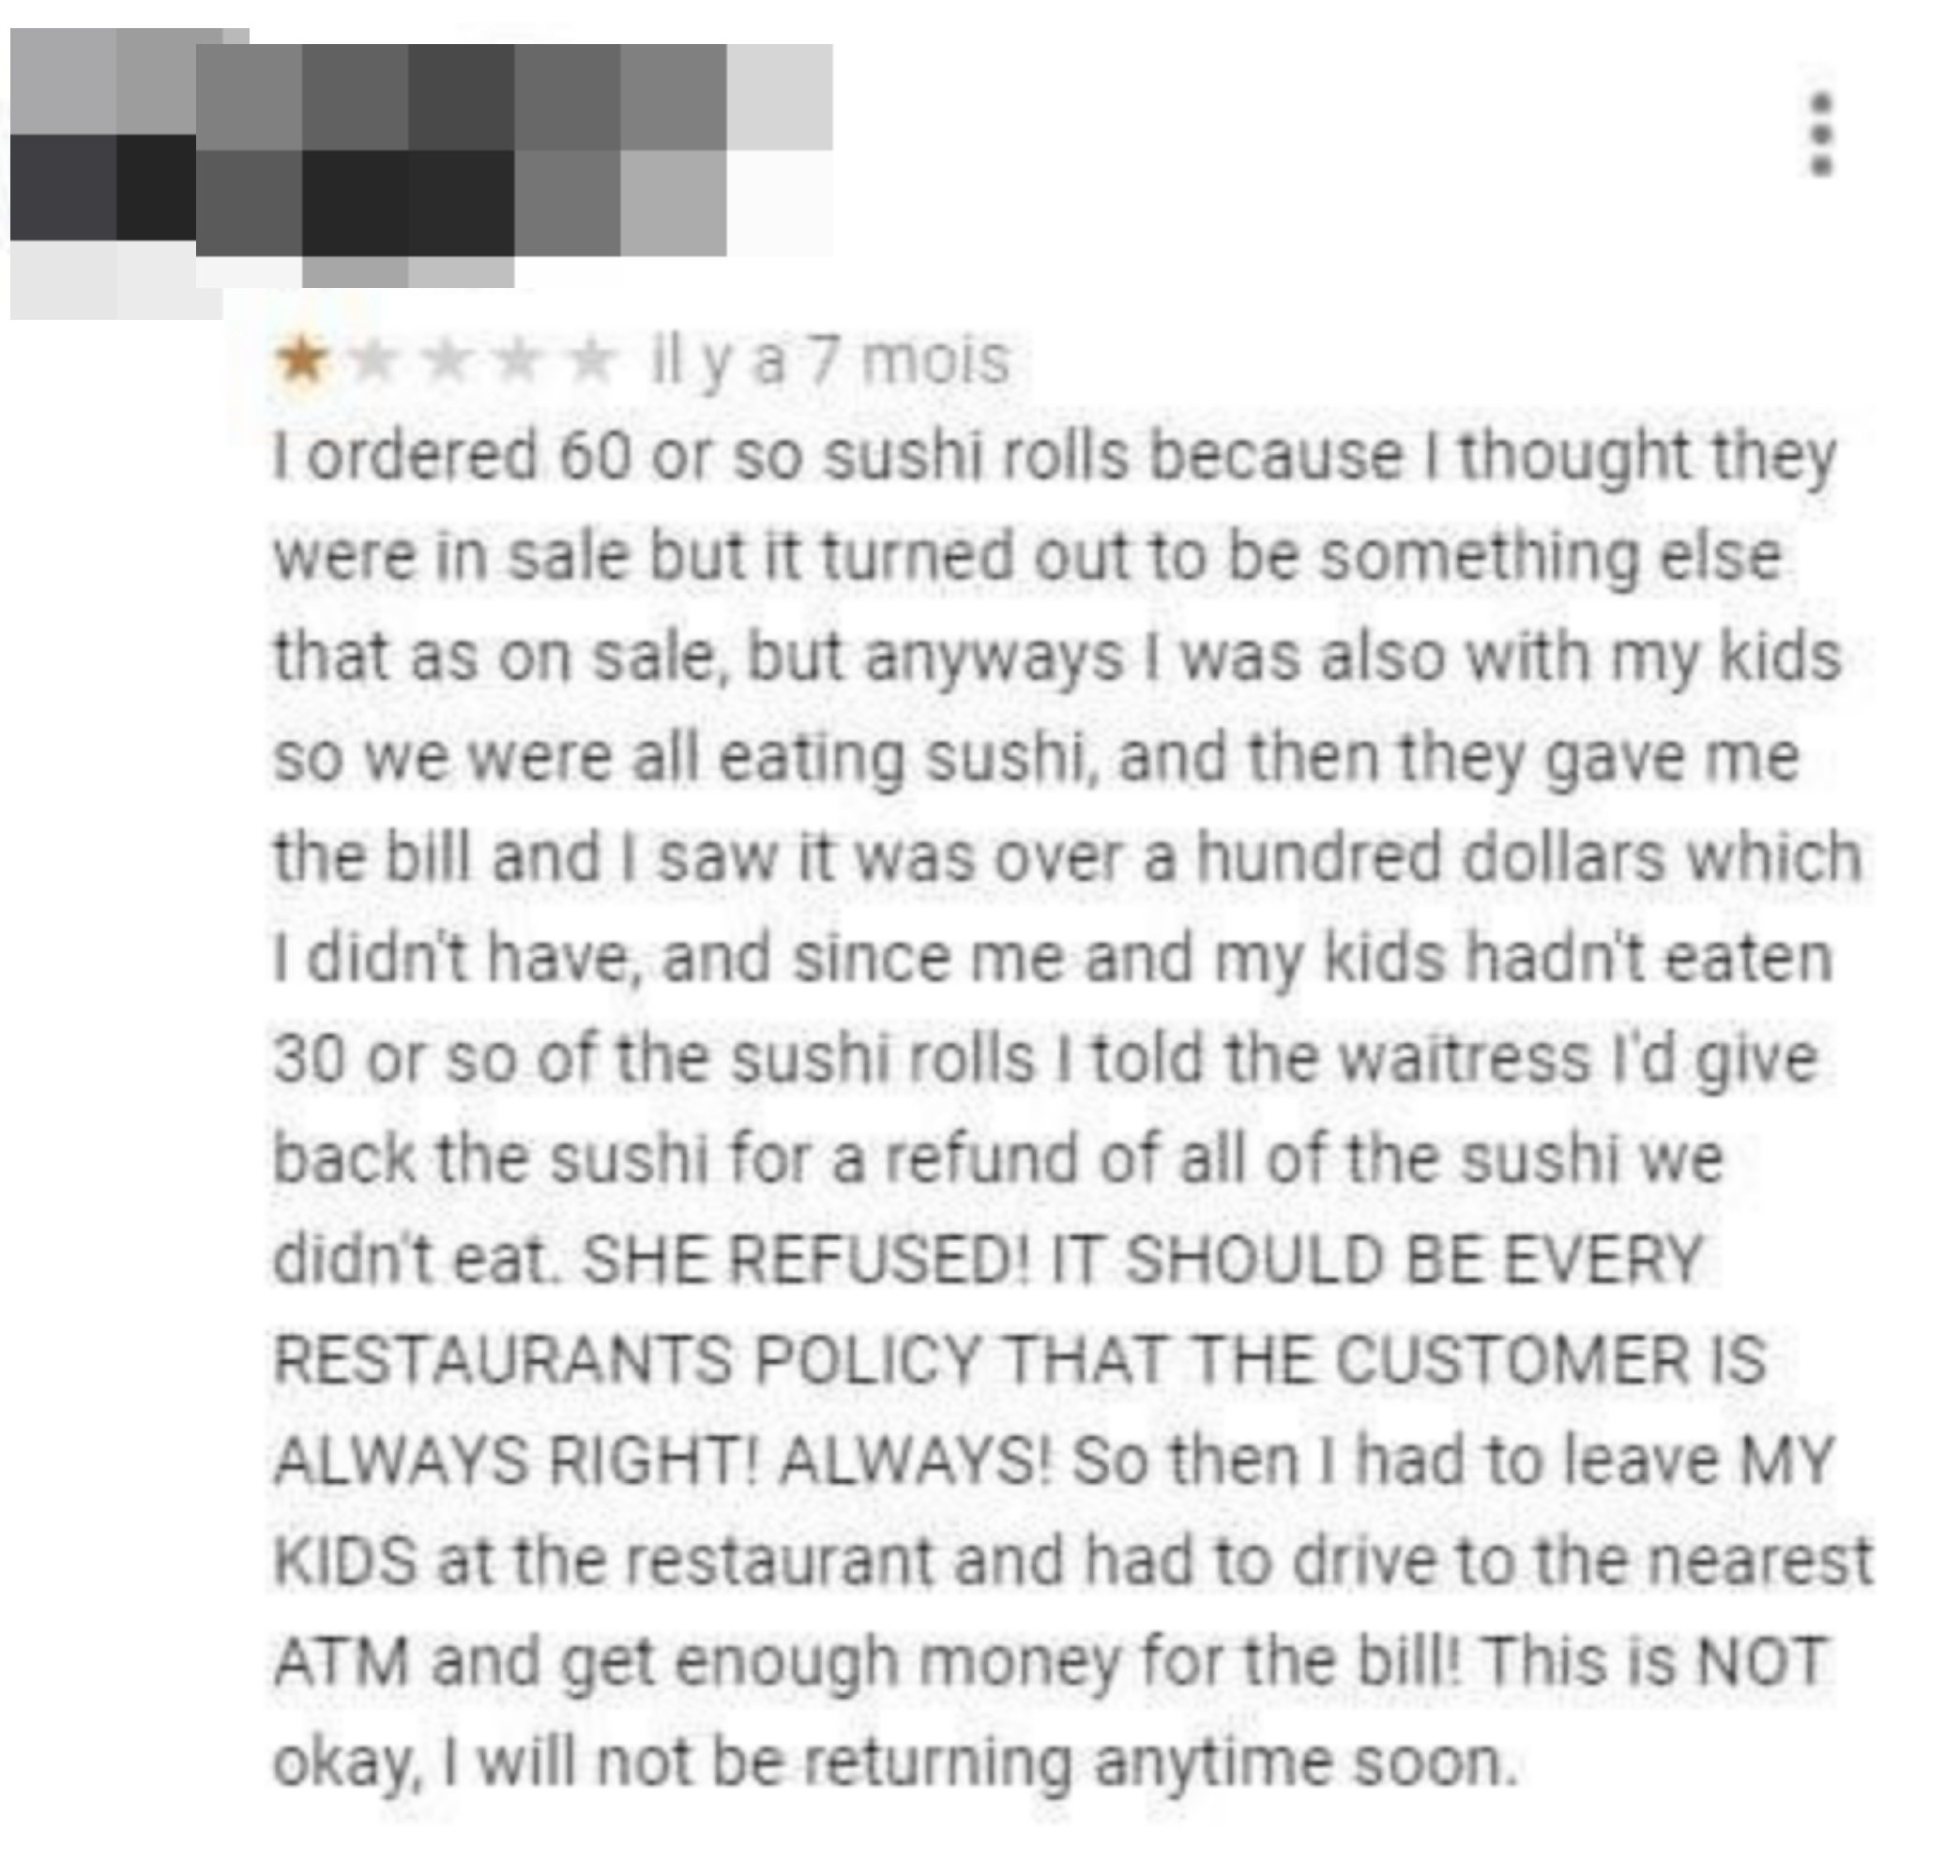 A review says they ordered 60 sushi rolls, when the bill came and they realized how expensive it was, they tried to return 30 of them to get half off the bill